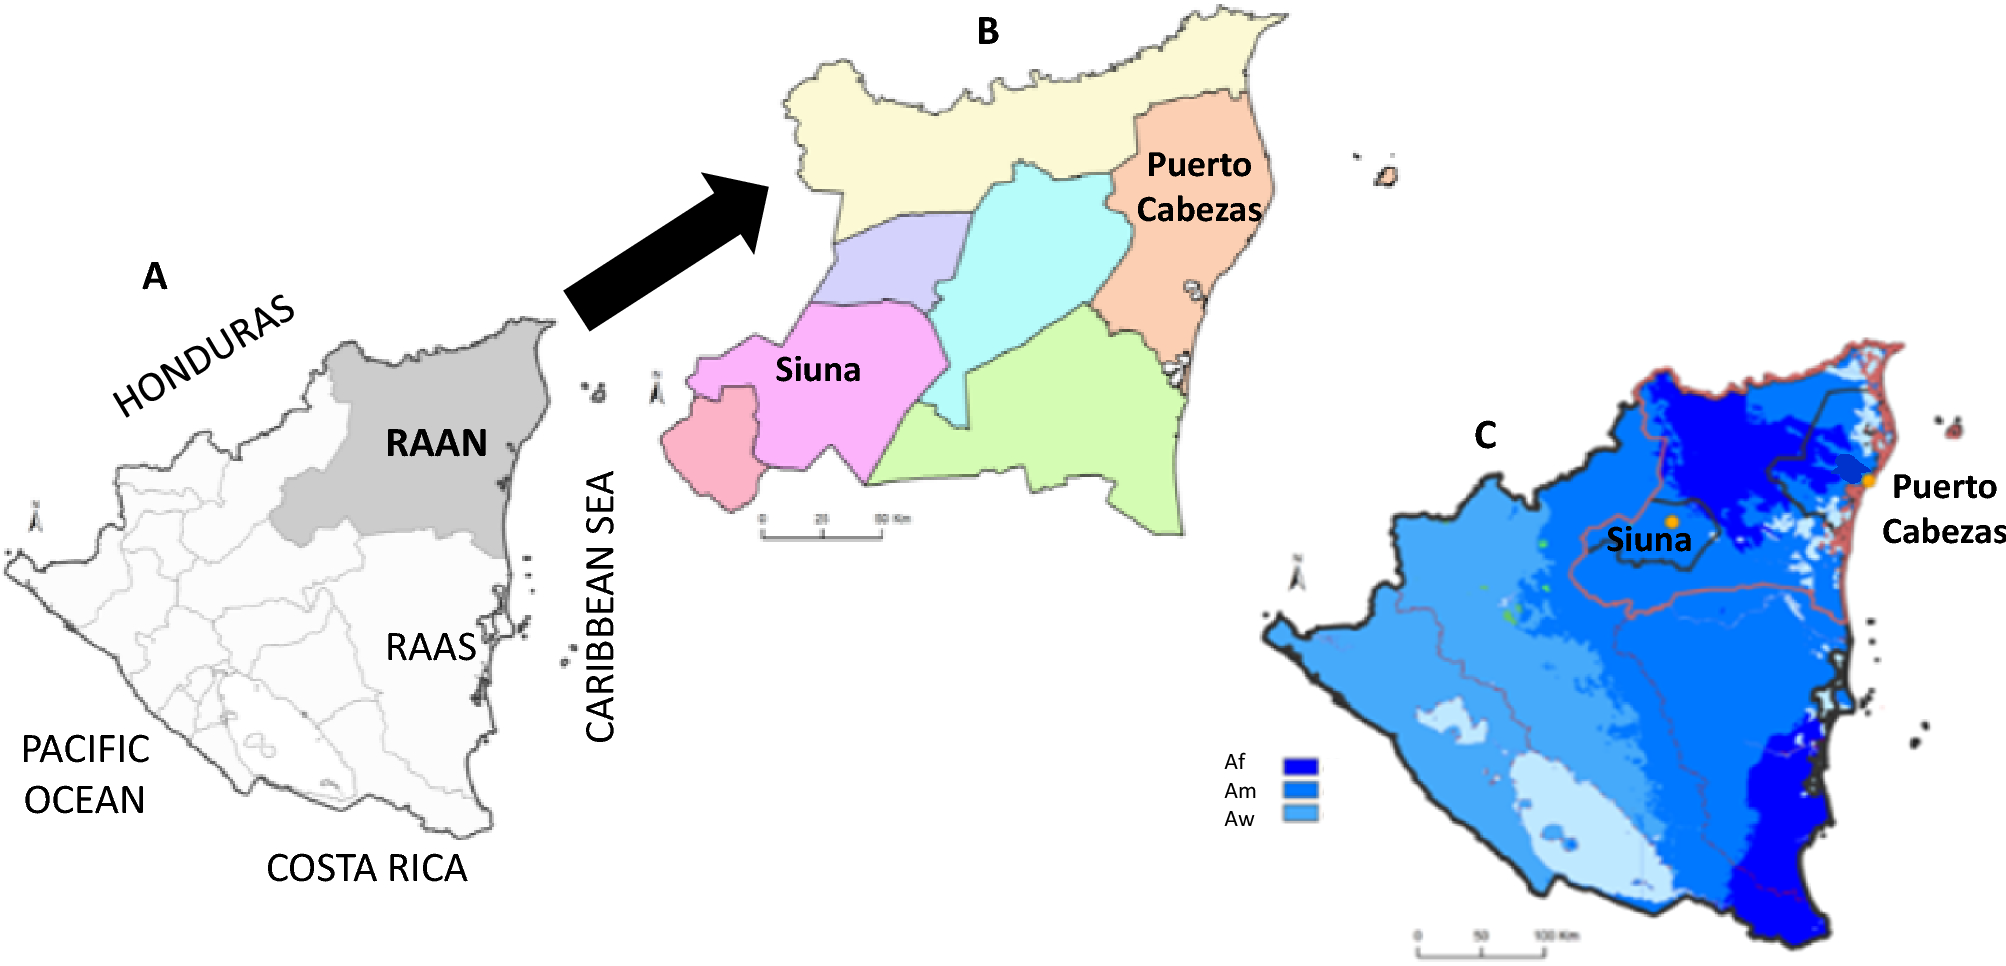 High intestinal parasite infection detected in children from Región  Autónoma Atlántico Norte (R.A.A.N.) of Nicaragua | Scientific Reports